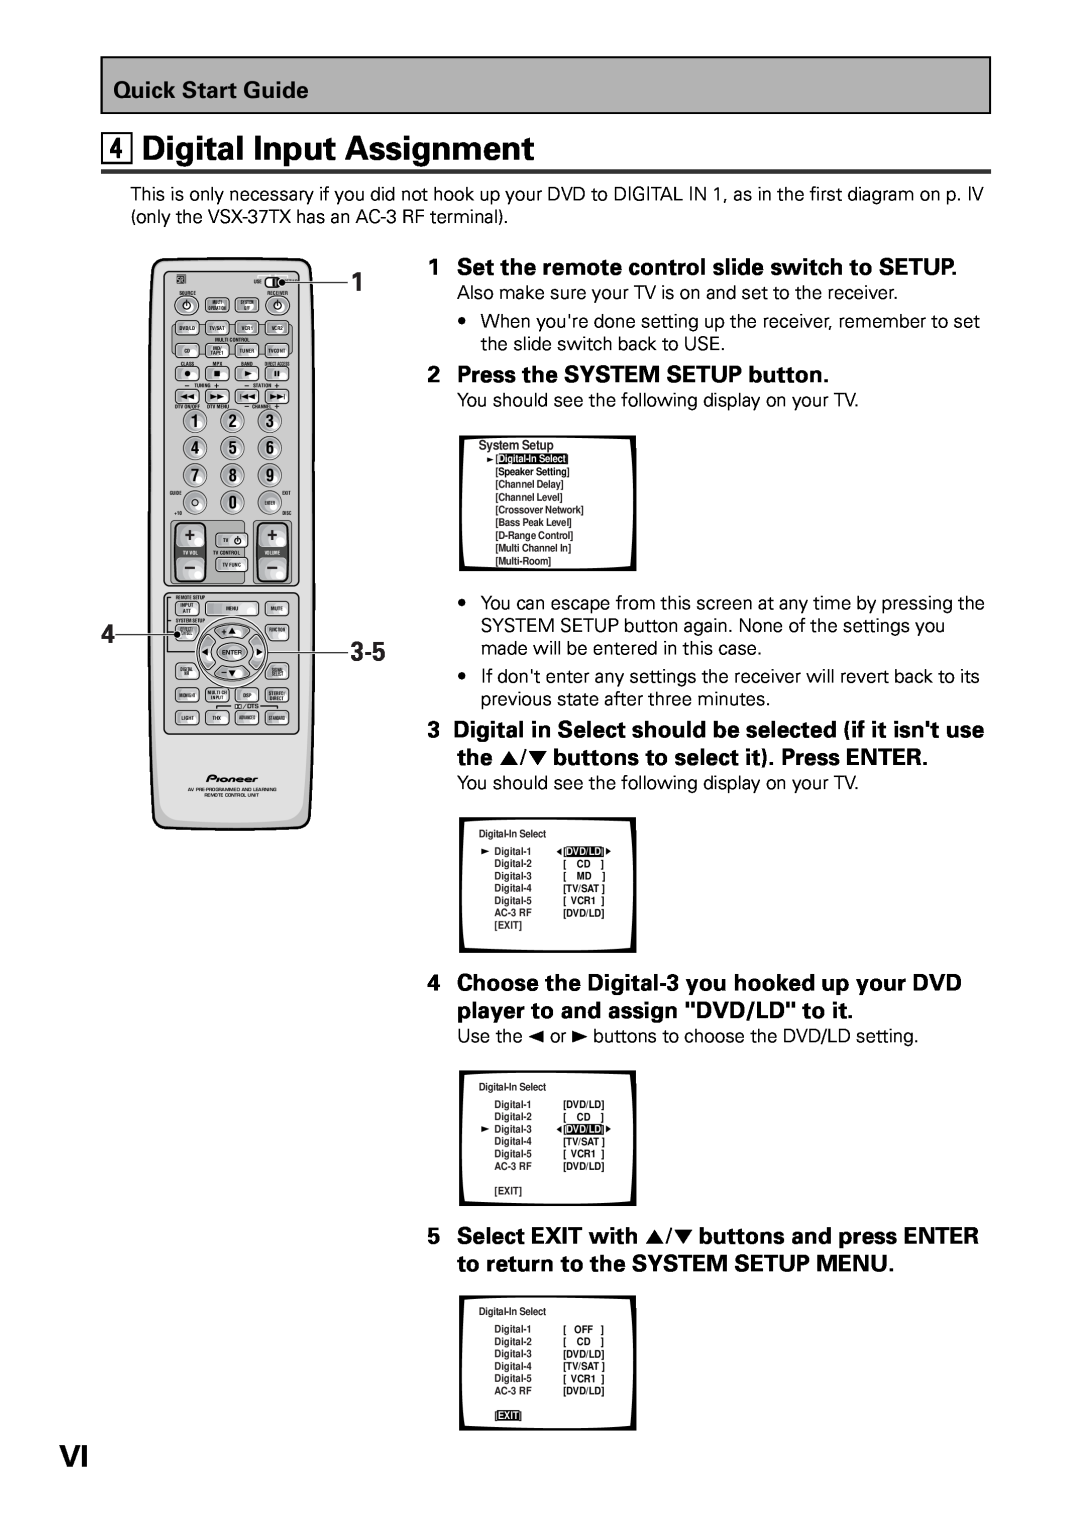 Pioneer VSX-36TX 4Digital Input Assignment, 1Set the remote control slide switch to SETUP, 2Press the SYSTEM SETUP button 